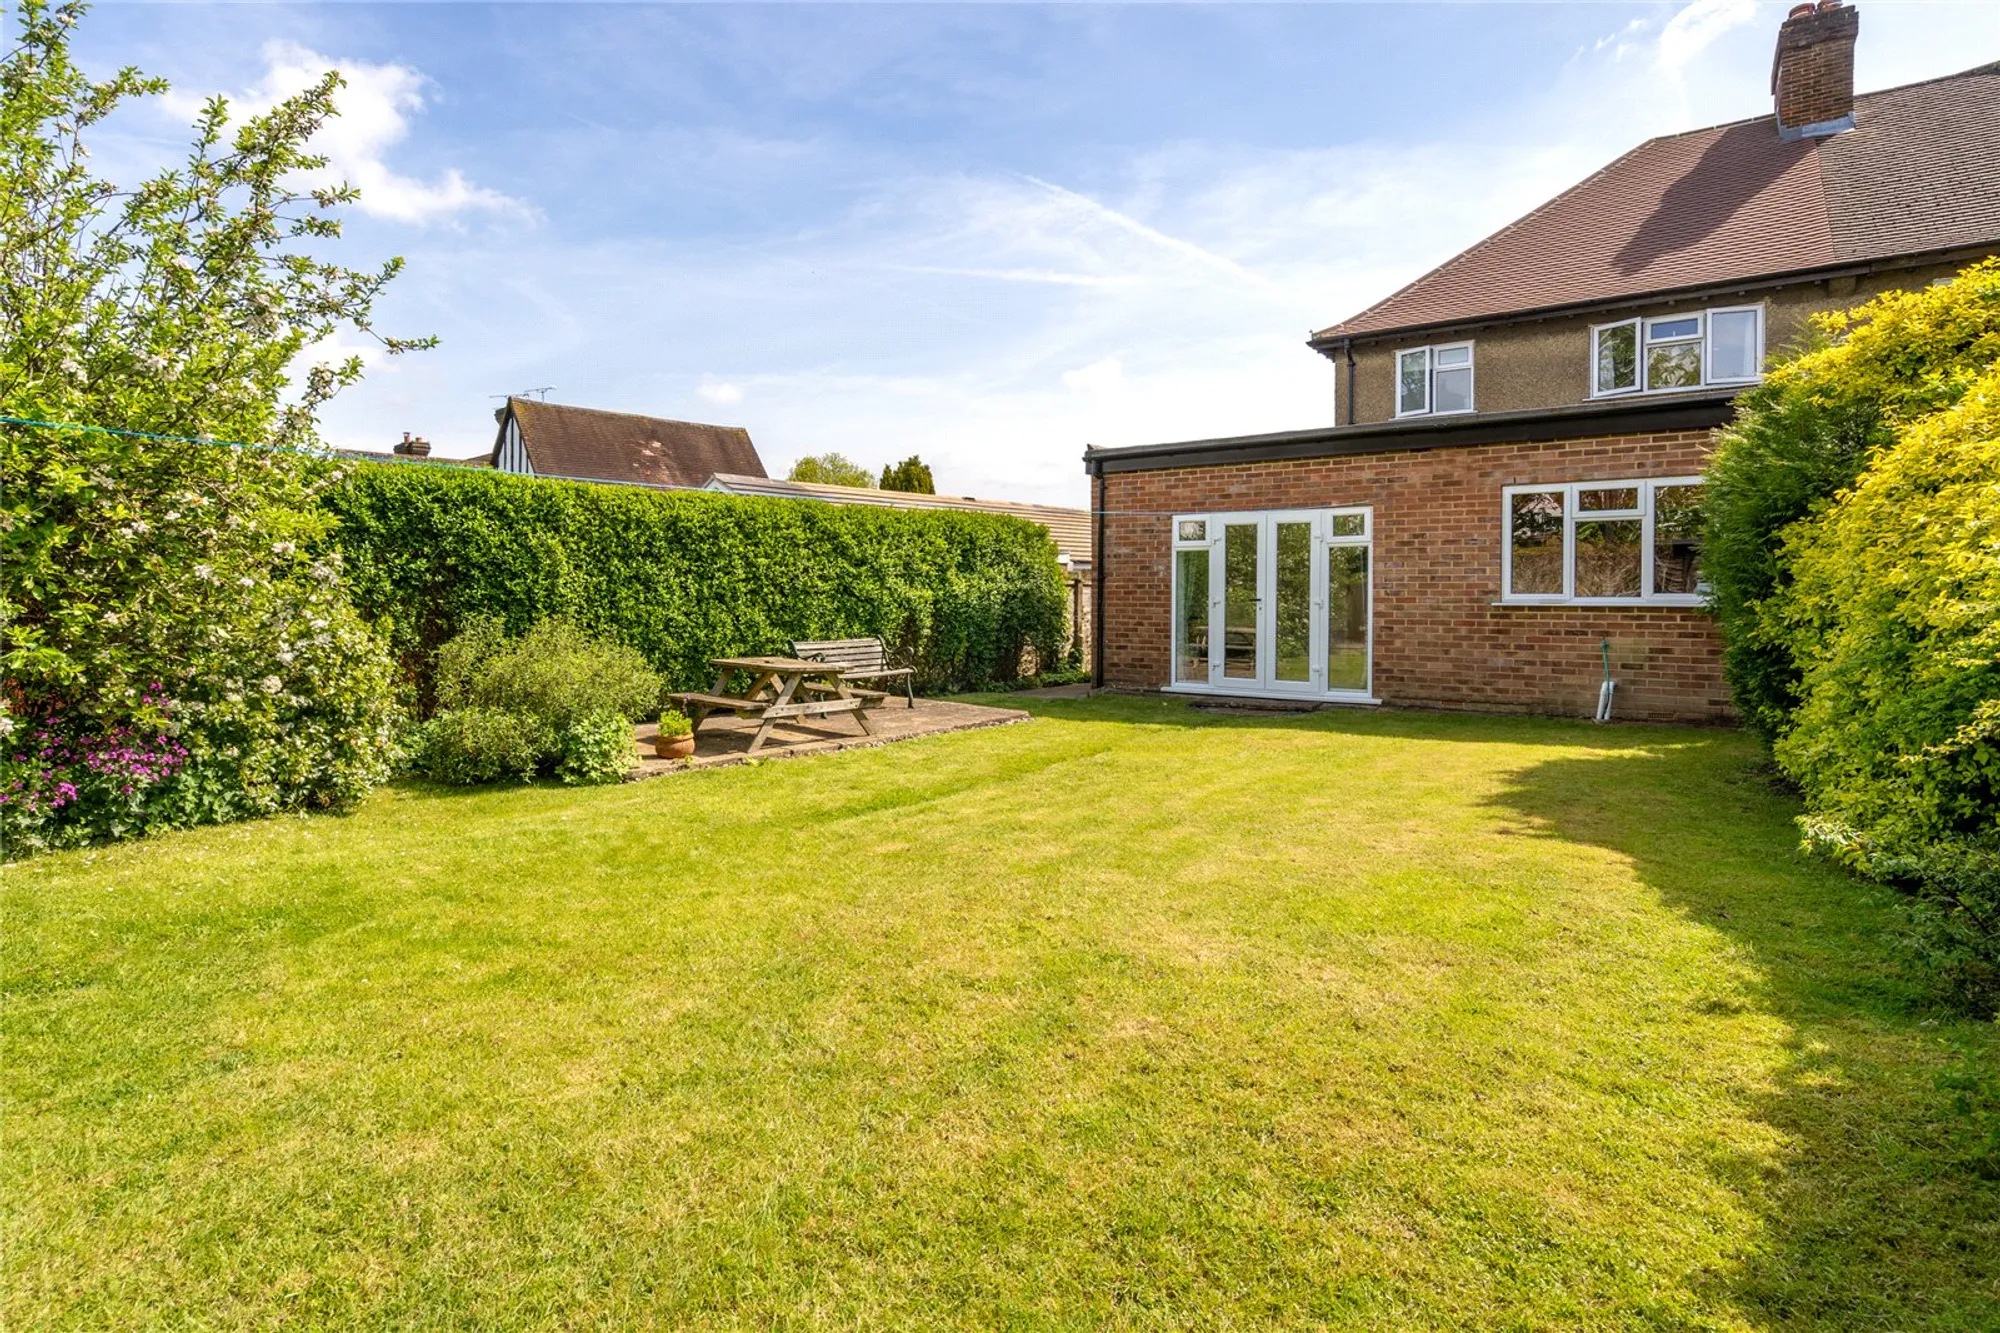 4 bed semi-detached house for sale in Slines Oak Road, Caterham  - Property Image 15